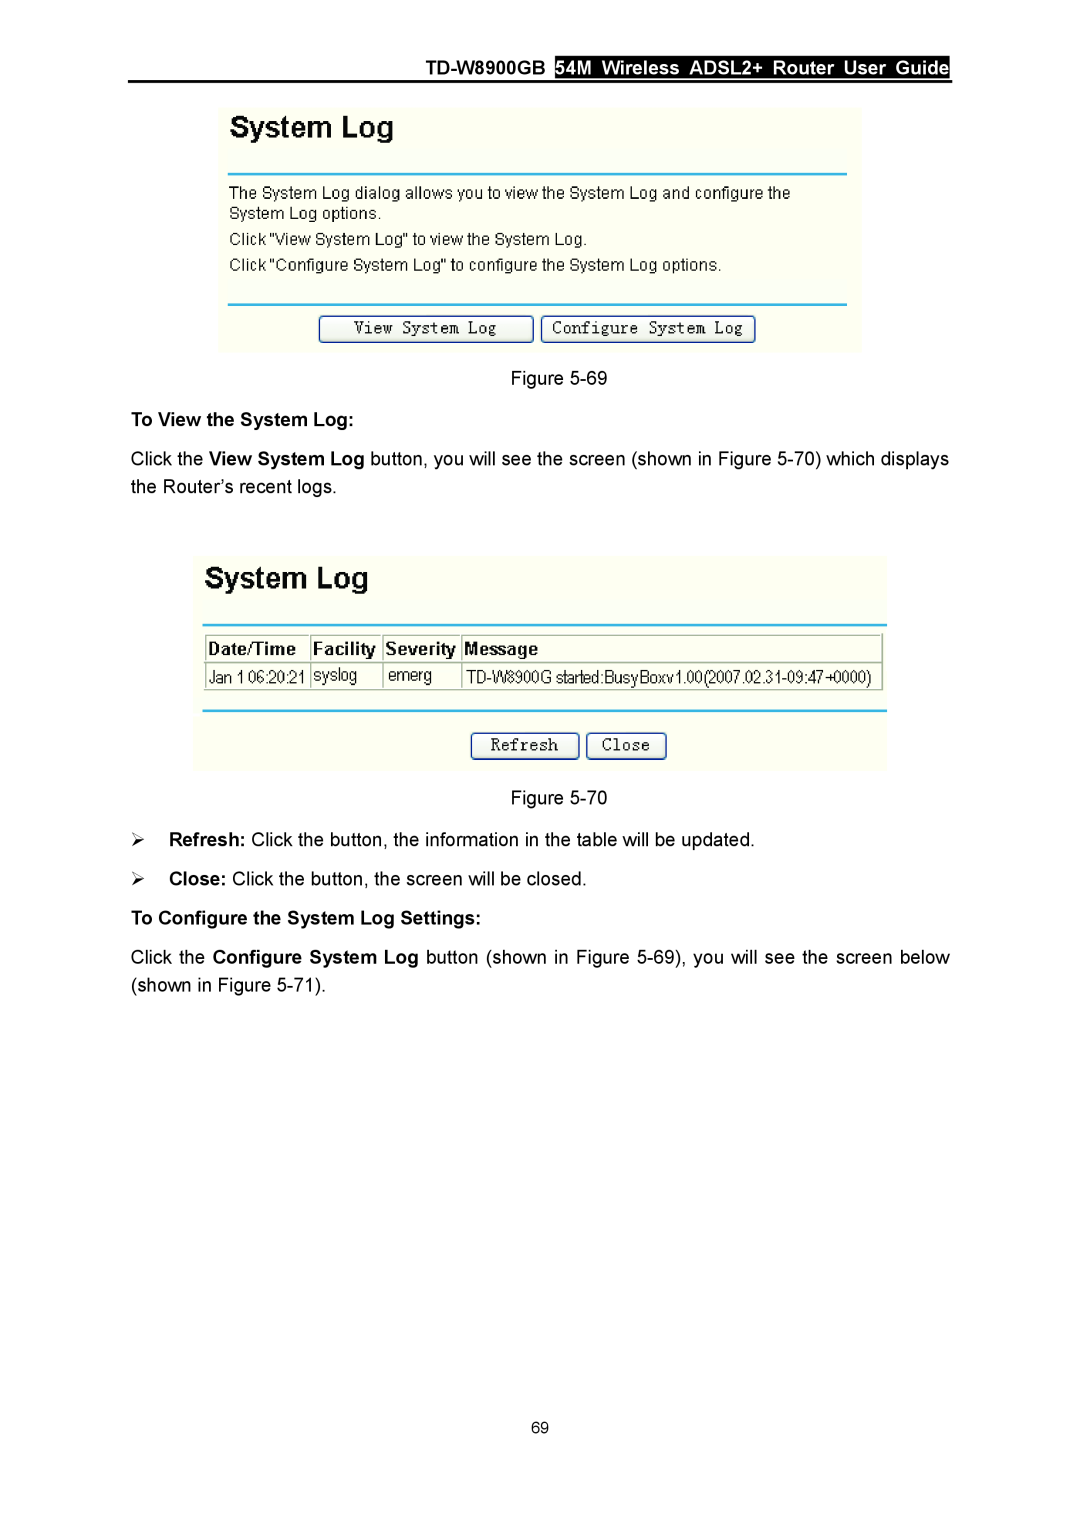 TP-Link TD-W8900GB 54M Wireless ADSL2+ Router User Guide, To View the System Log, To Configure the System Log Settings 